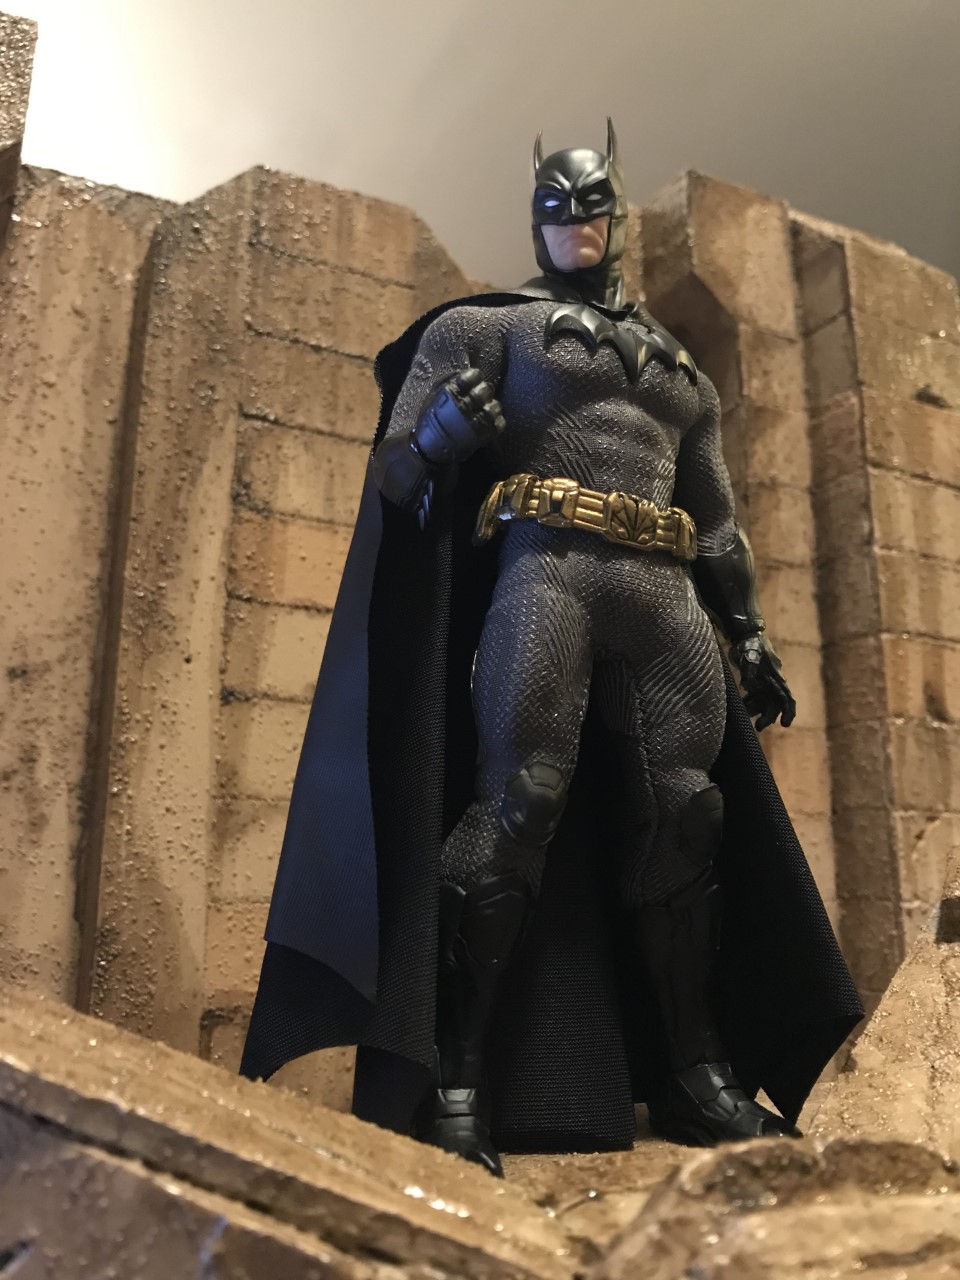 Action Figure - Mezco One:12 Collective - (1:12 scale) DC Comics Figures |  Page 389 | Collector Freaks Collectibles Forum